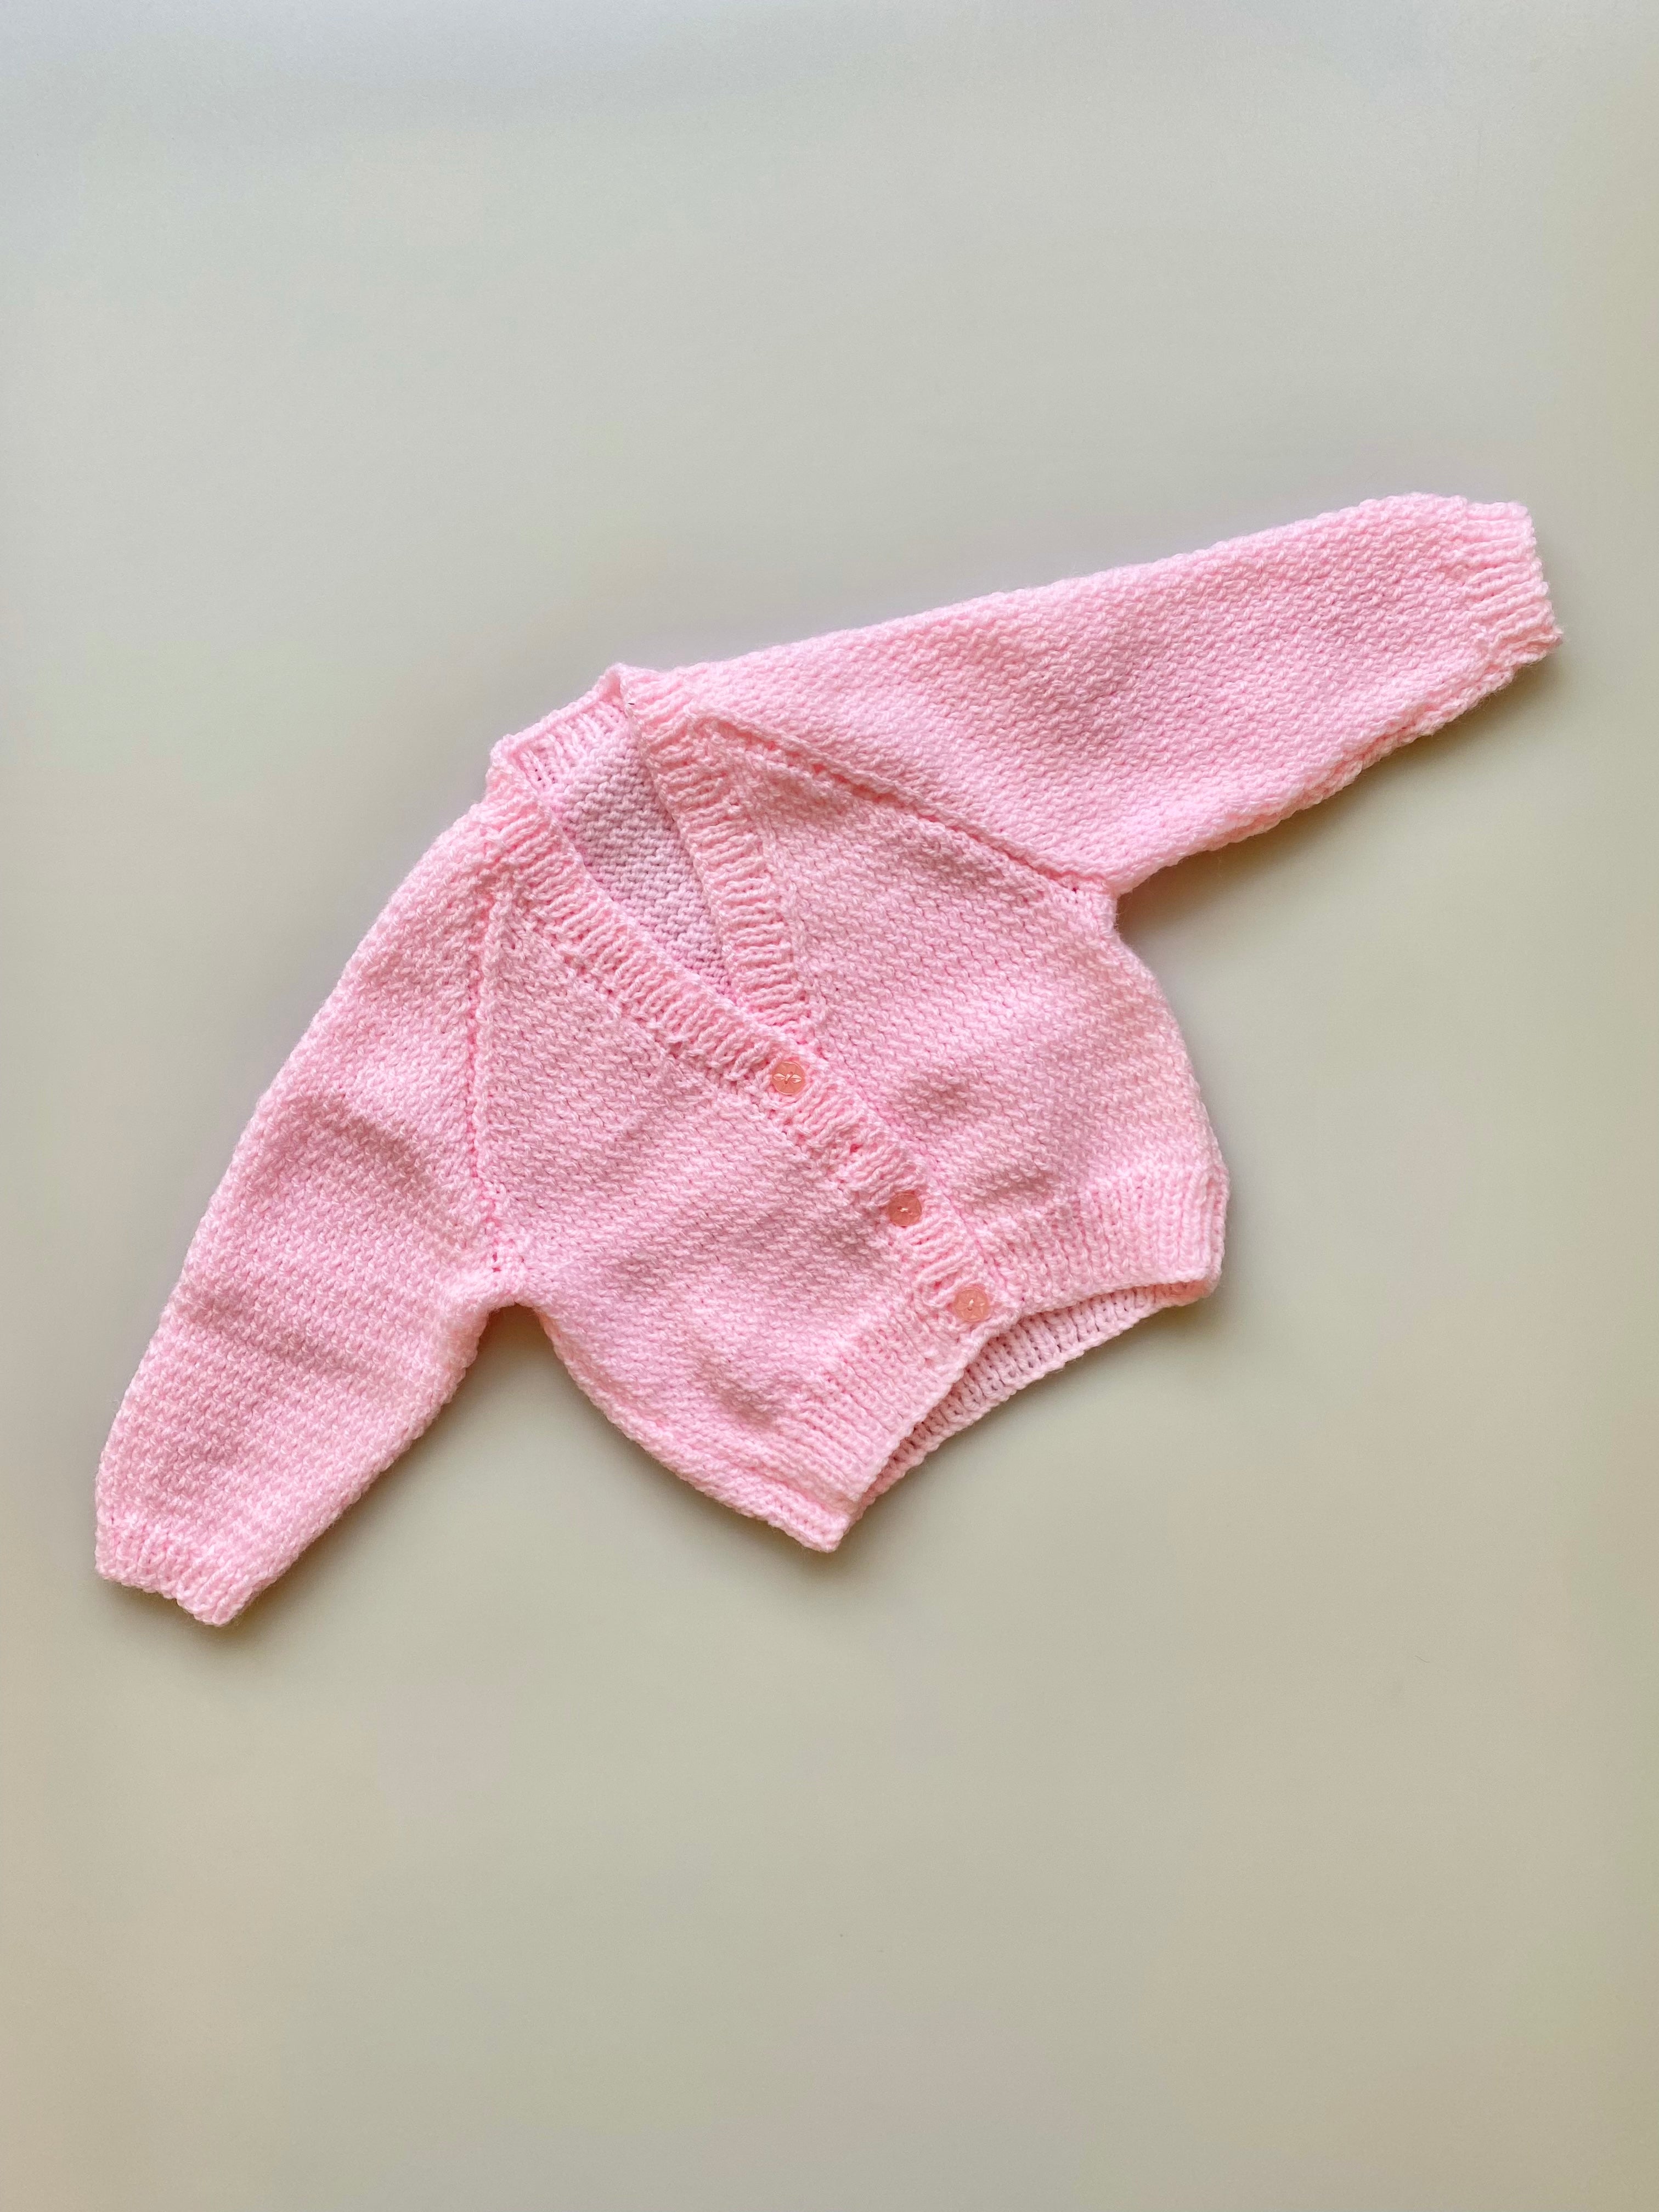 Hand Knitted Candy Pink Cardigan 3-6 Months